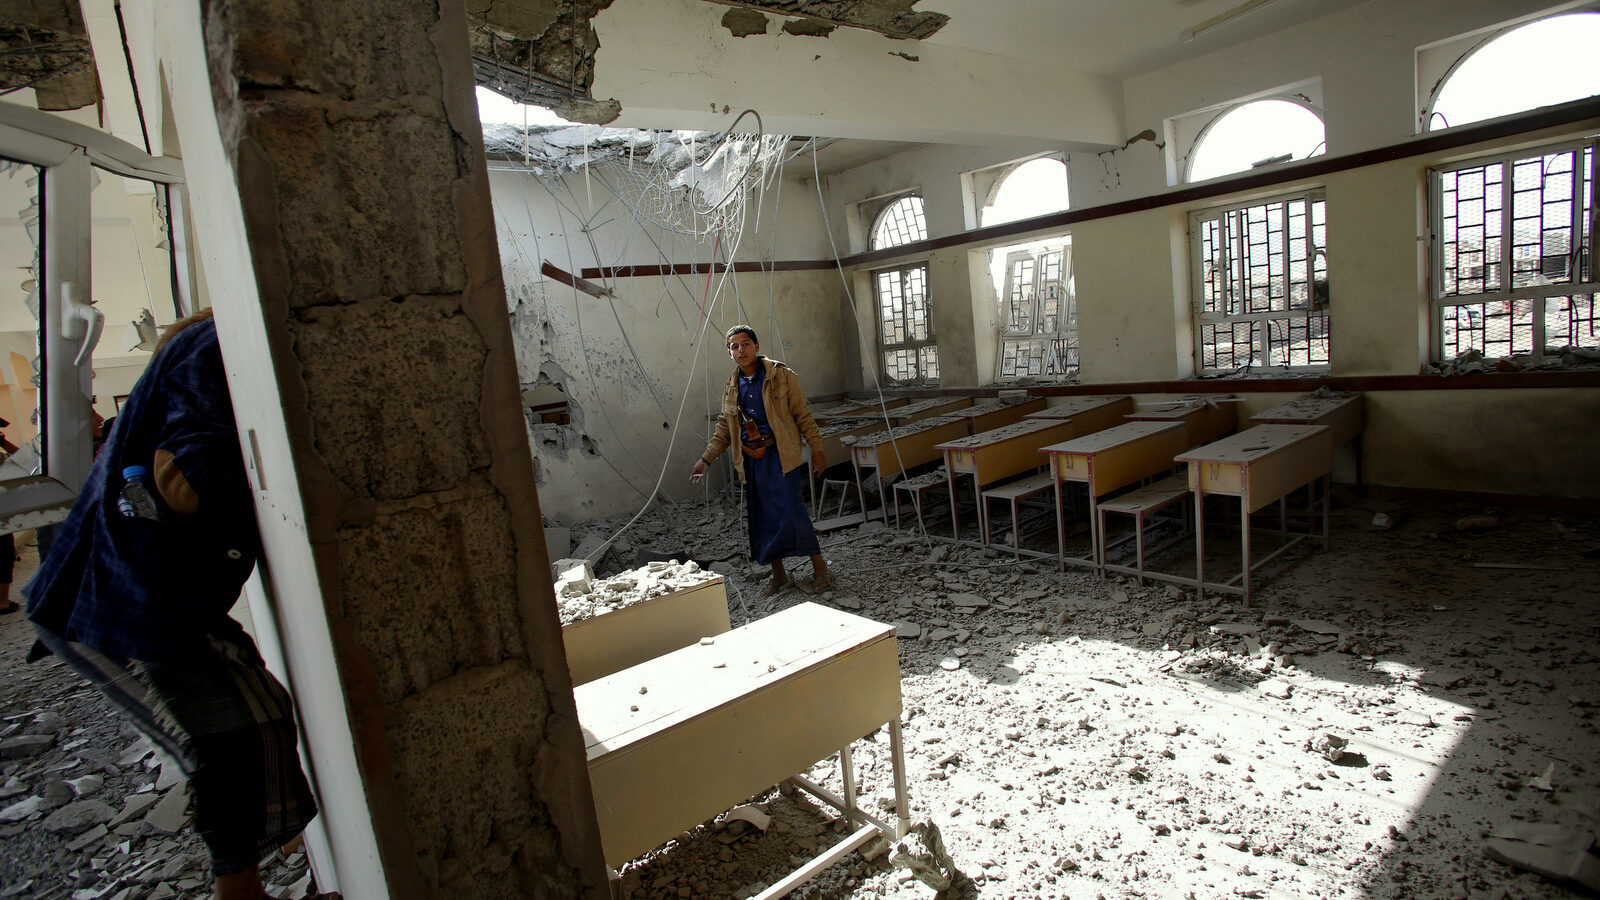 Boys walk around in a classroom at a school damaged by Saudi-led airstrikes in Sanaa, Yemen, Monday, July 20, 2015. The death toll in Yemen from the Shiite rebel shelling of a town near the southern port city of Aden rose on Monday to nearly 100, the head of an international aid group said, describing it as "the worst day" for the city and its surroundings in over three months of fighting. (AP Photo/Hani Mohammed)